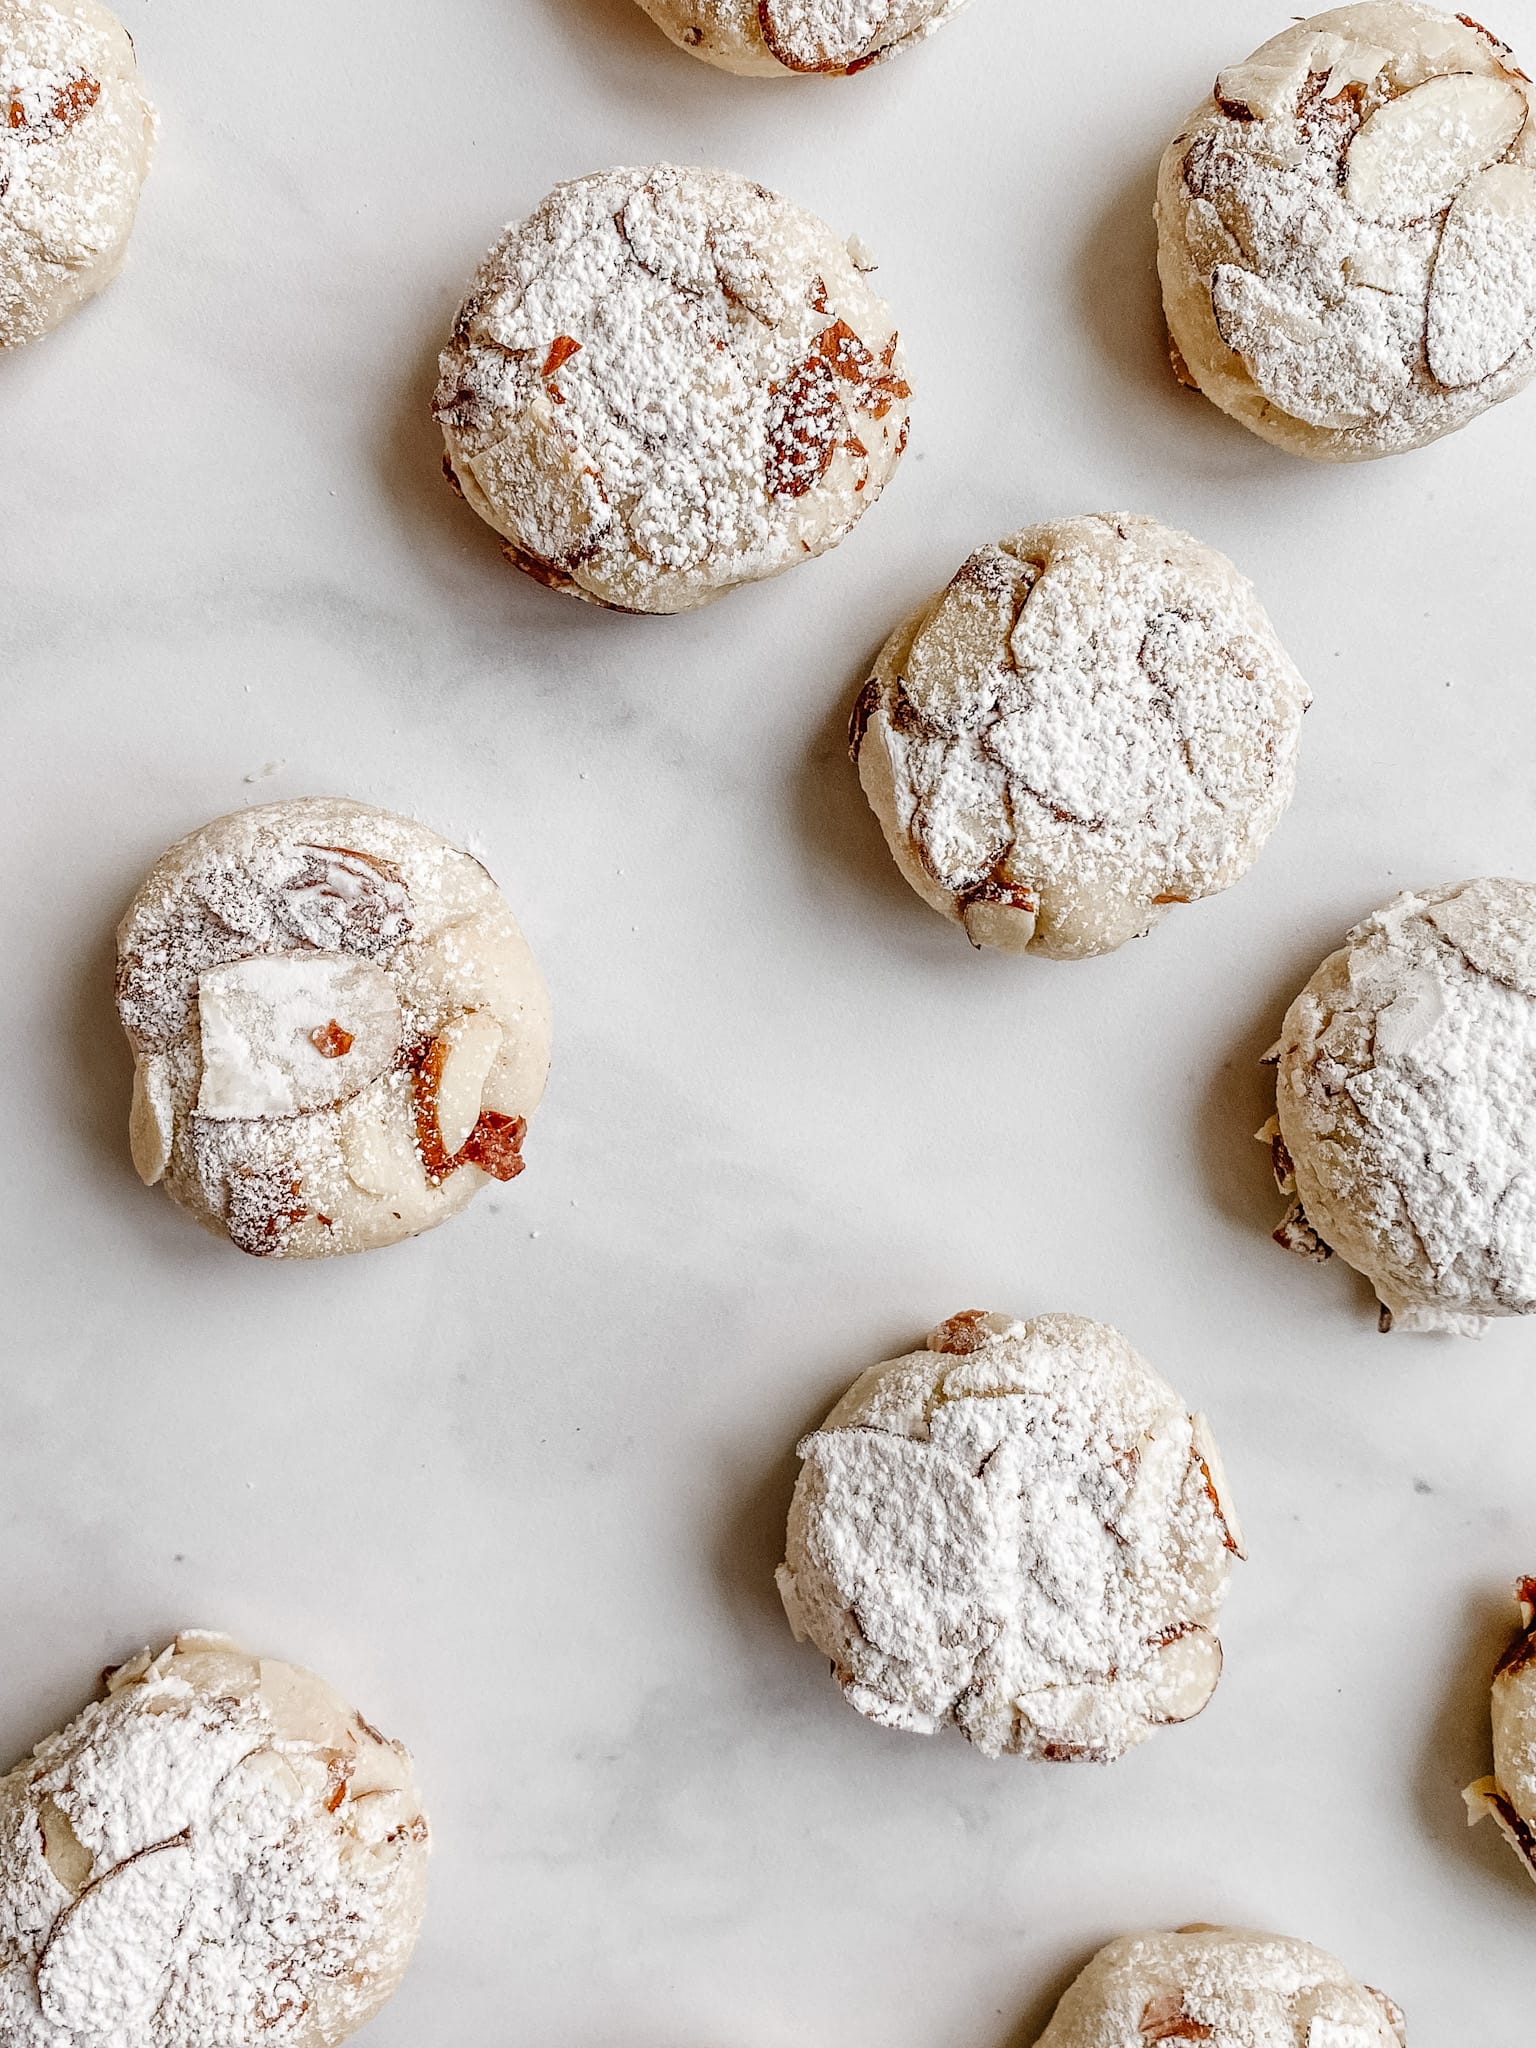 A few gluten-free amaretti cookies laid out.